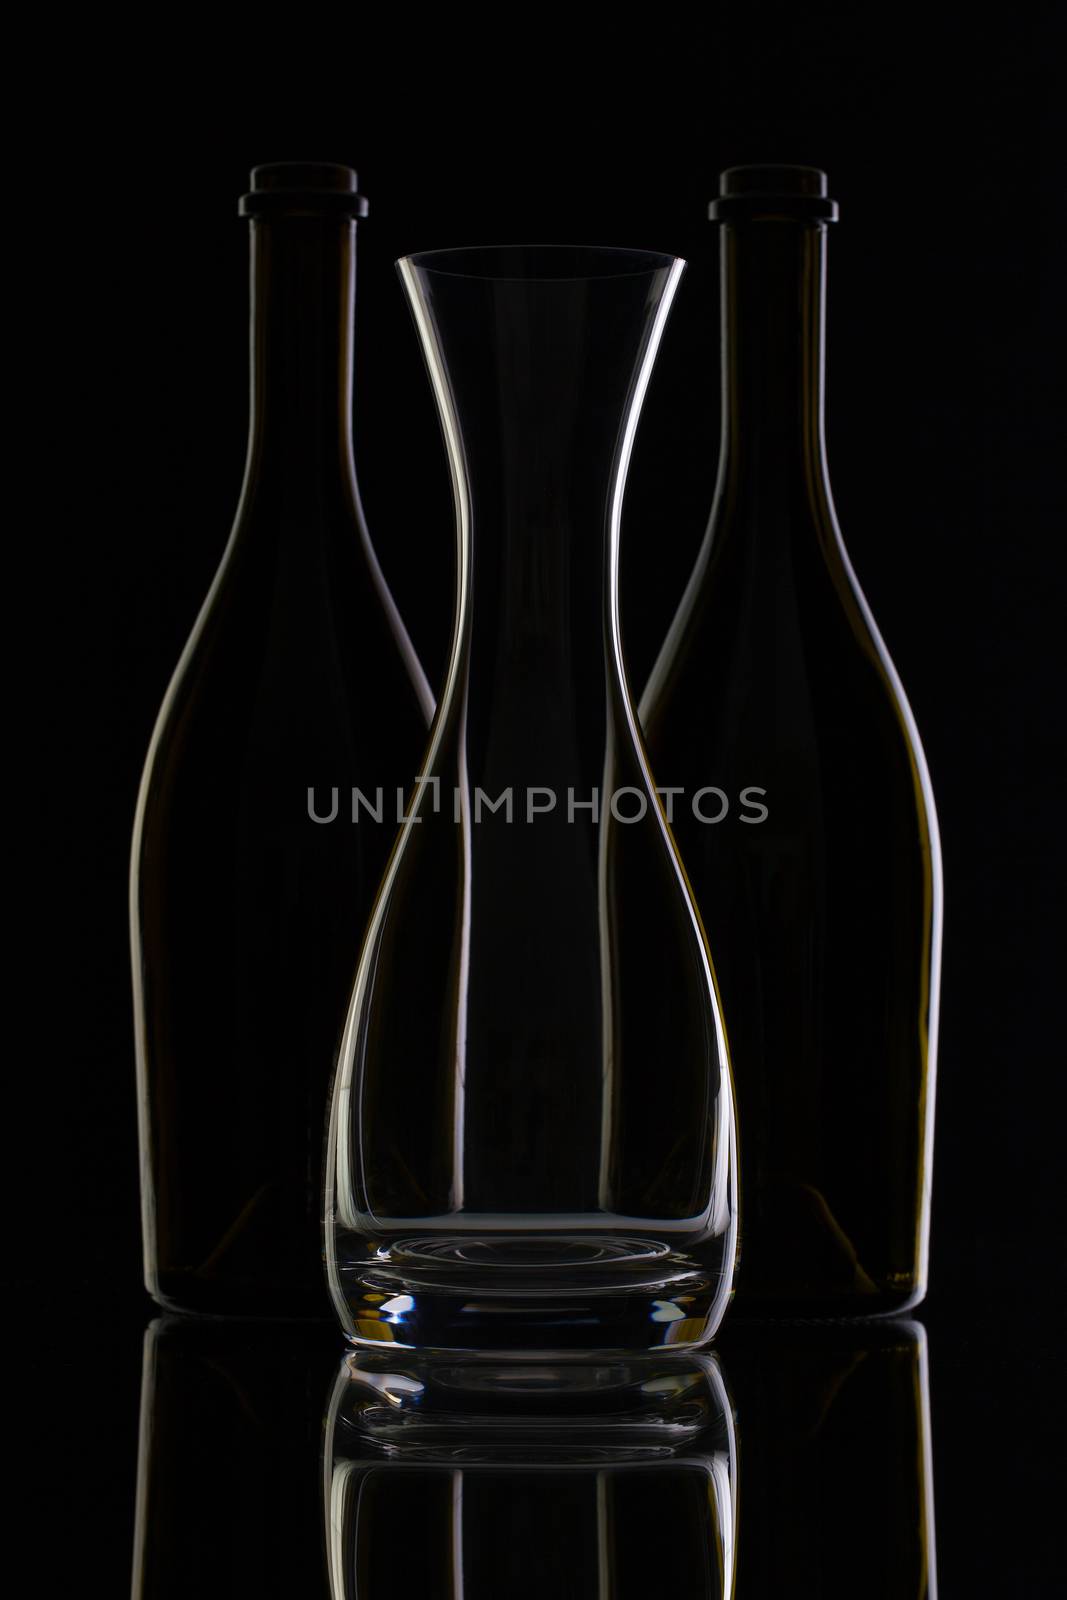 Empty glass and bottles on the black background